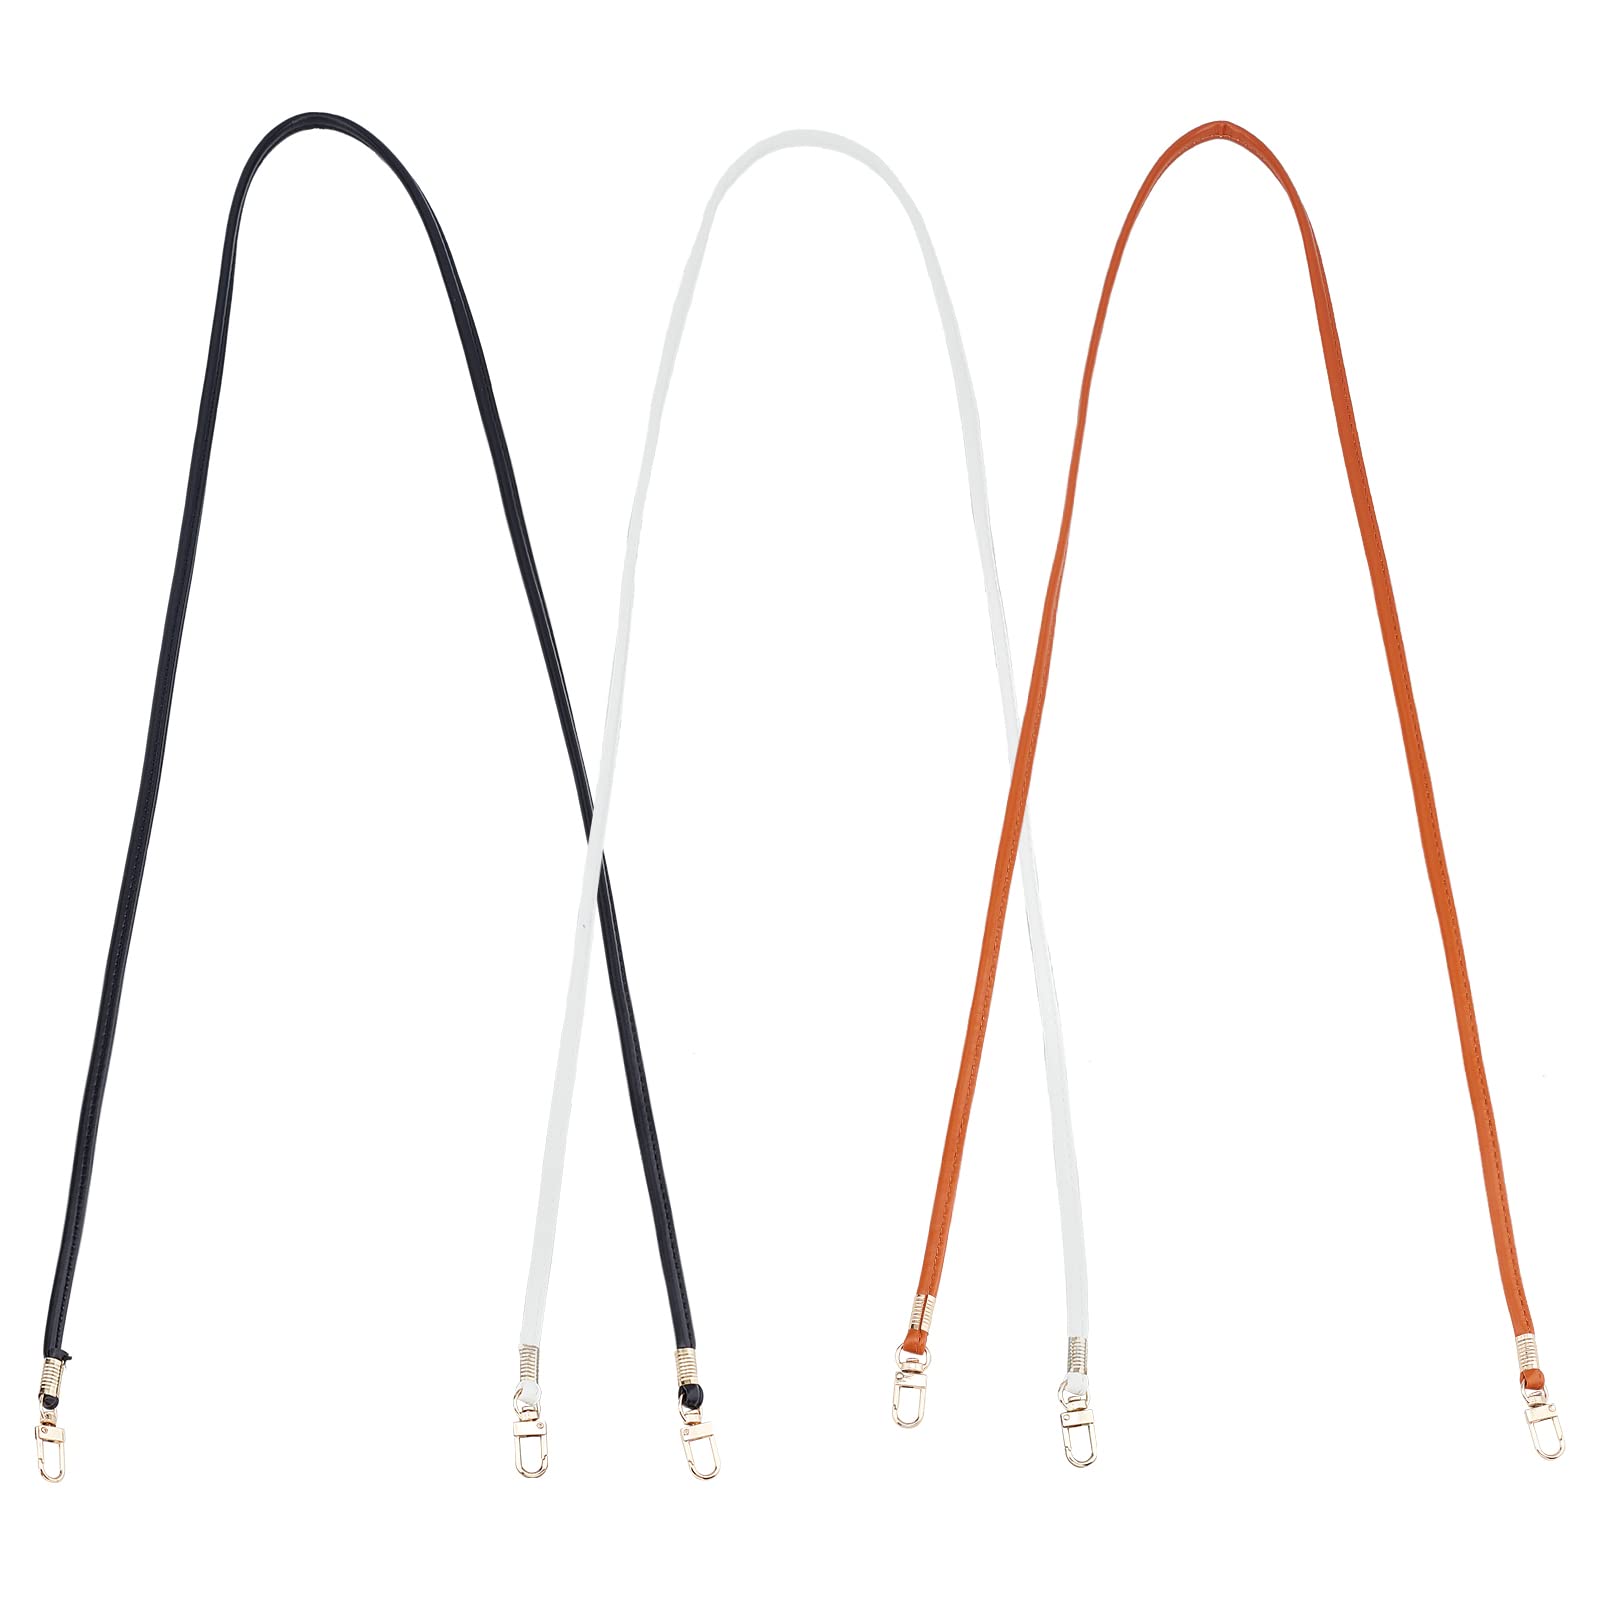 SUPERFINDINGS 3 Colors Leather Crossbody Strap Long Thin Soft Replacement Purse Straps 44.88 in Imitation Leather Bag Strap with Gold Swivel Clasps for Small Bag Purse Wallet Clutch Phone Case